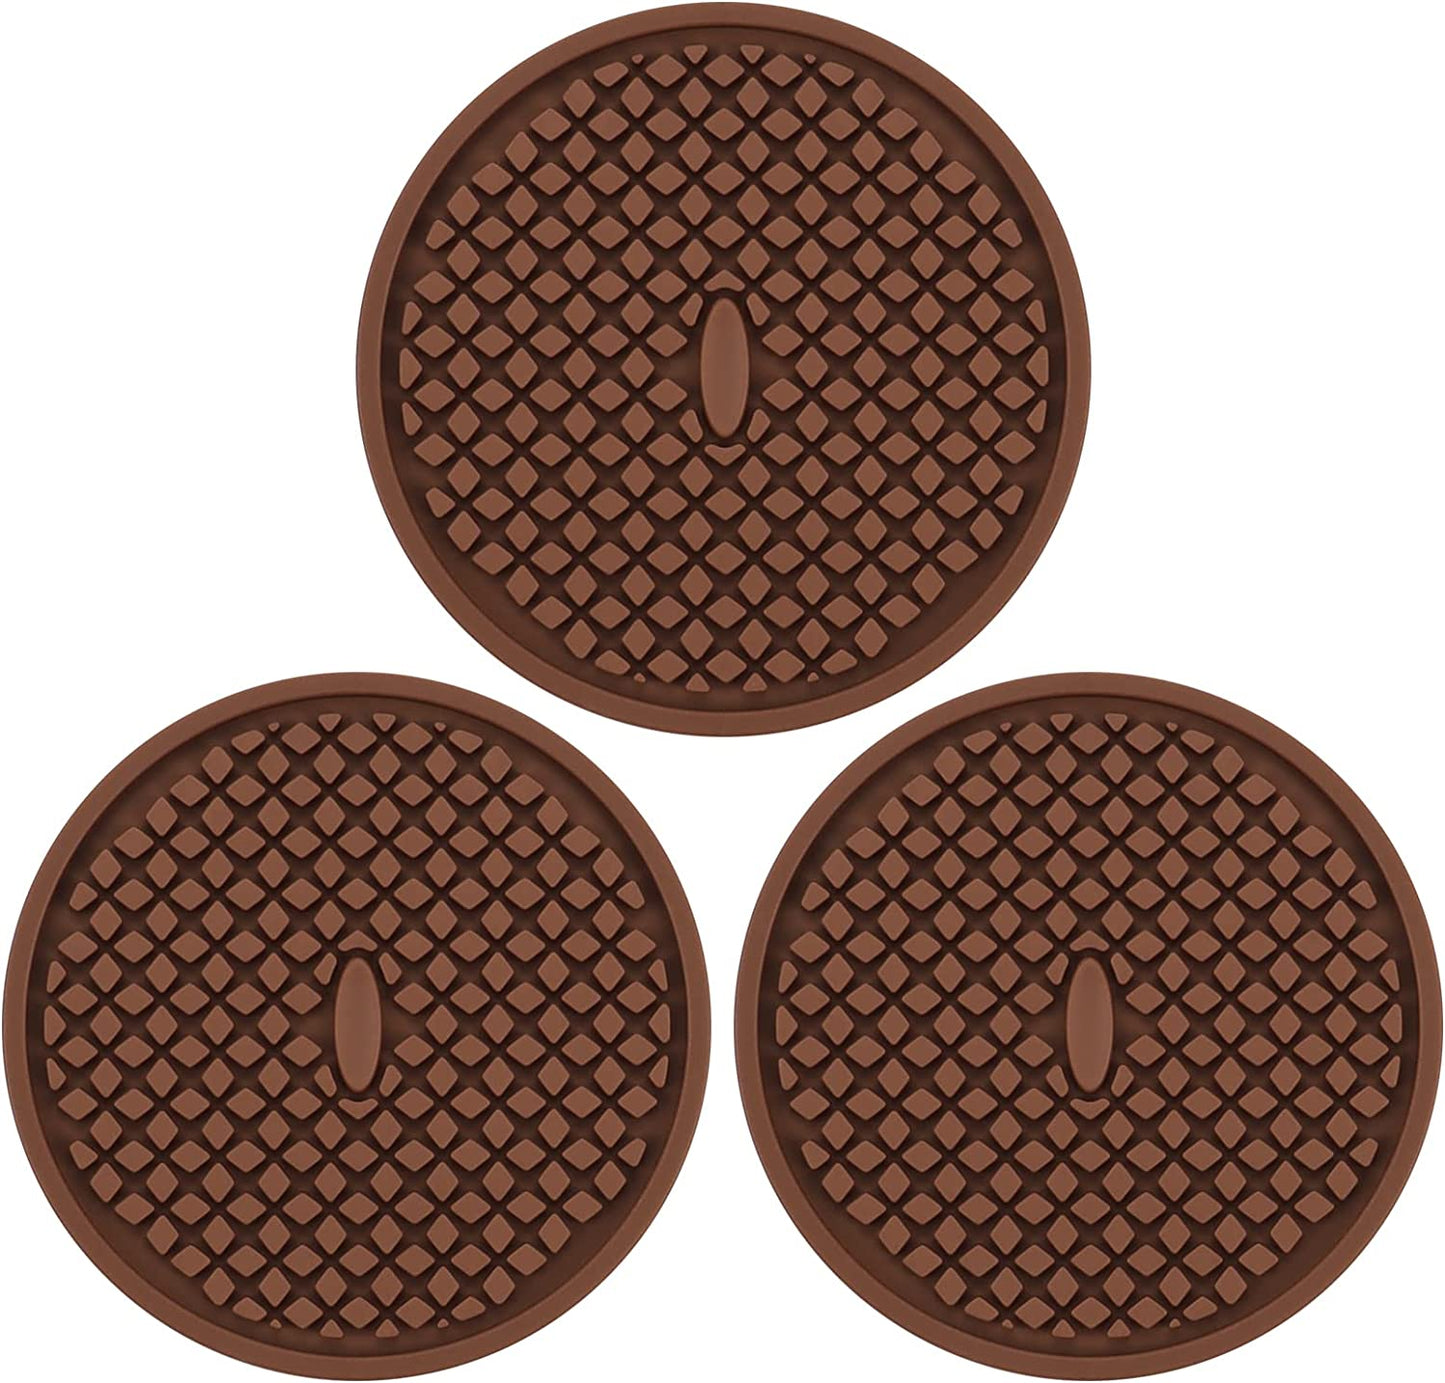 7 Pack Silicone Coasters for Drinks, Thickened Coasters with Deep Tray Grooved Design Cup Mat, Washable Heat Resistant Durable Non-Slip Coasters for Coffee Table Wooden Desk Kitchen Bar (Brown)